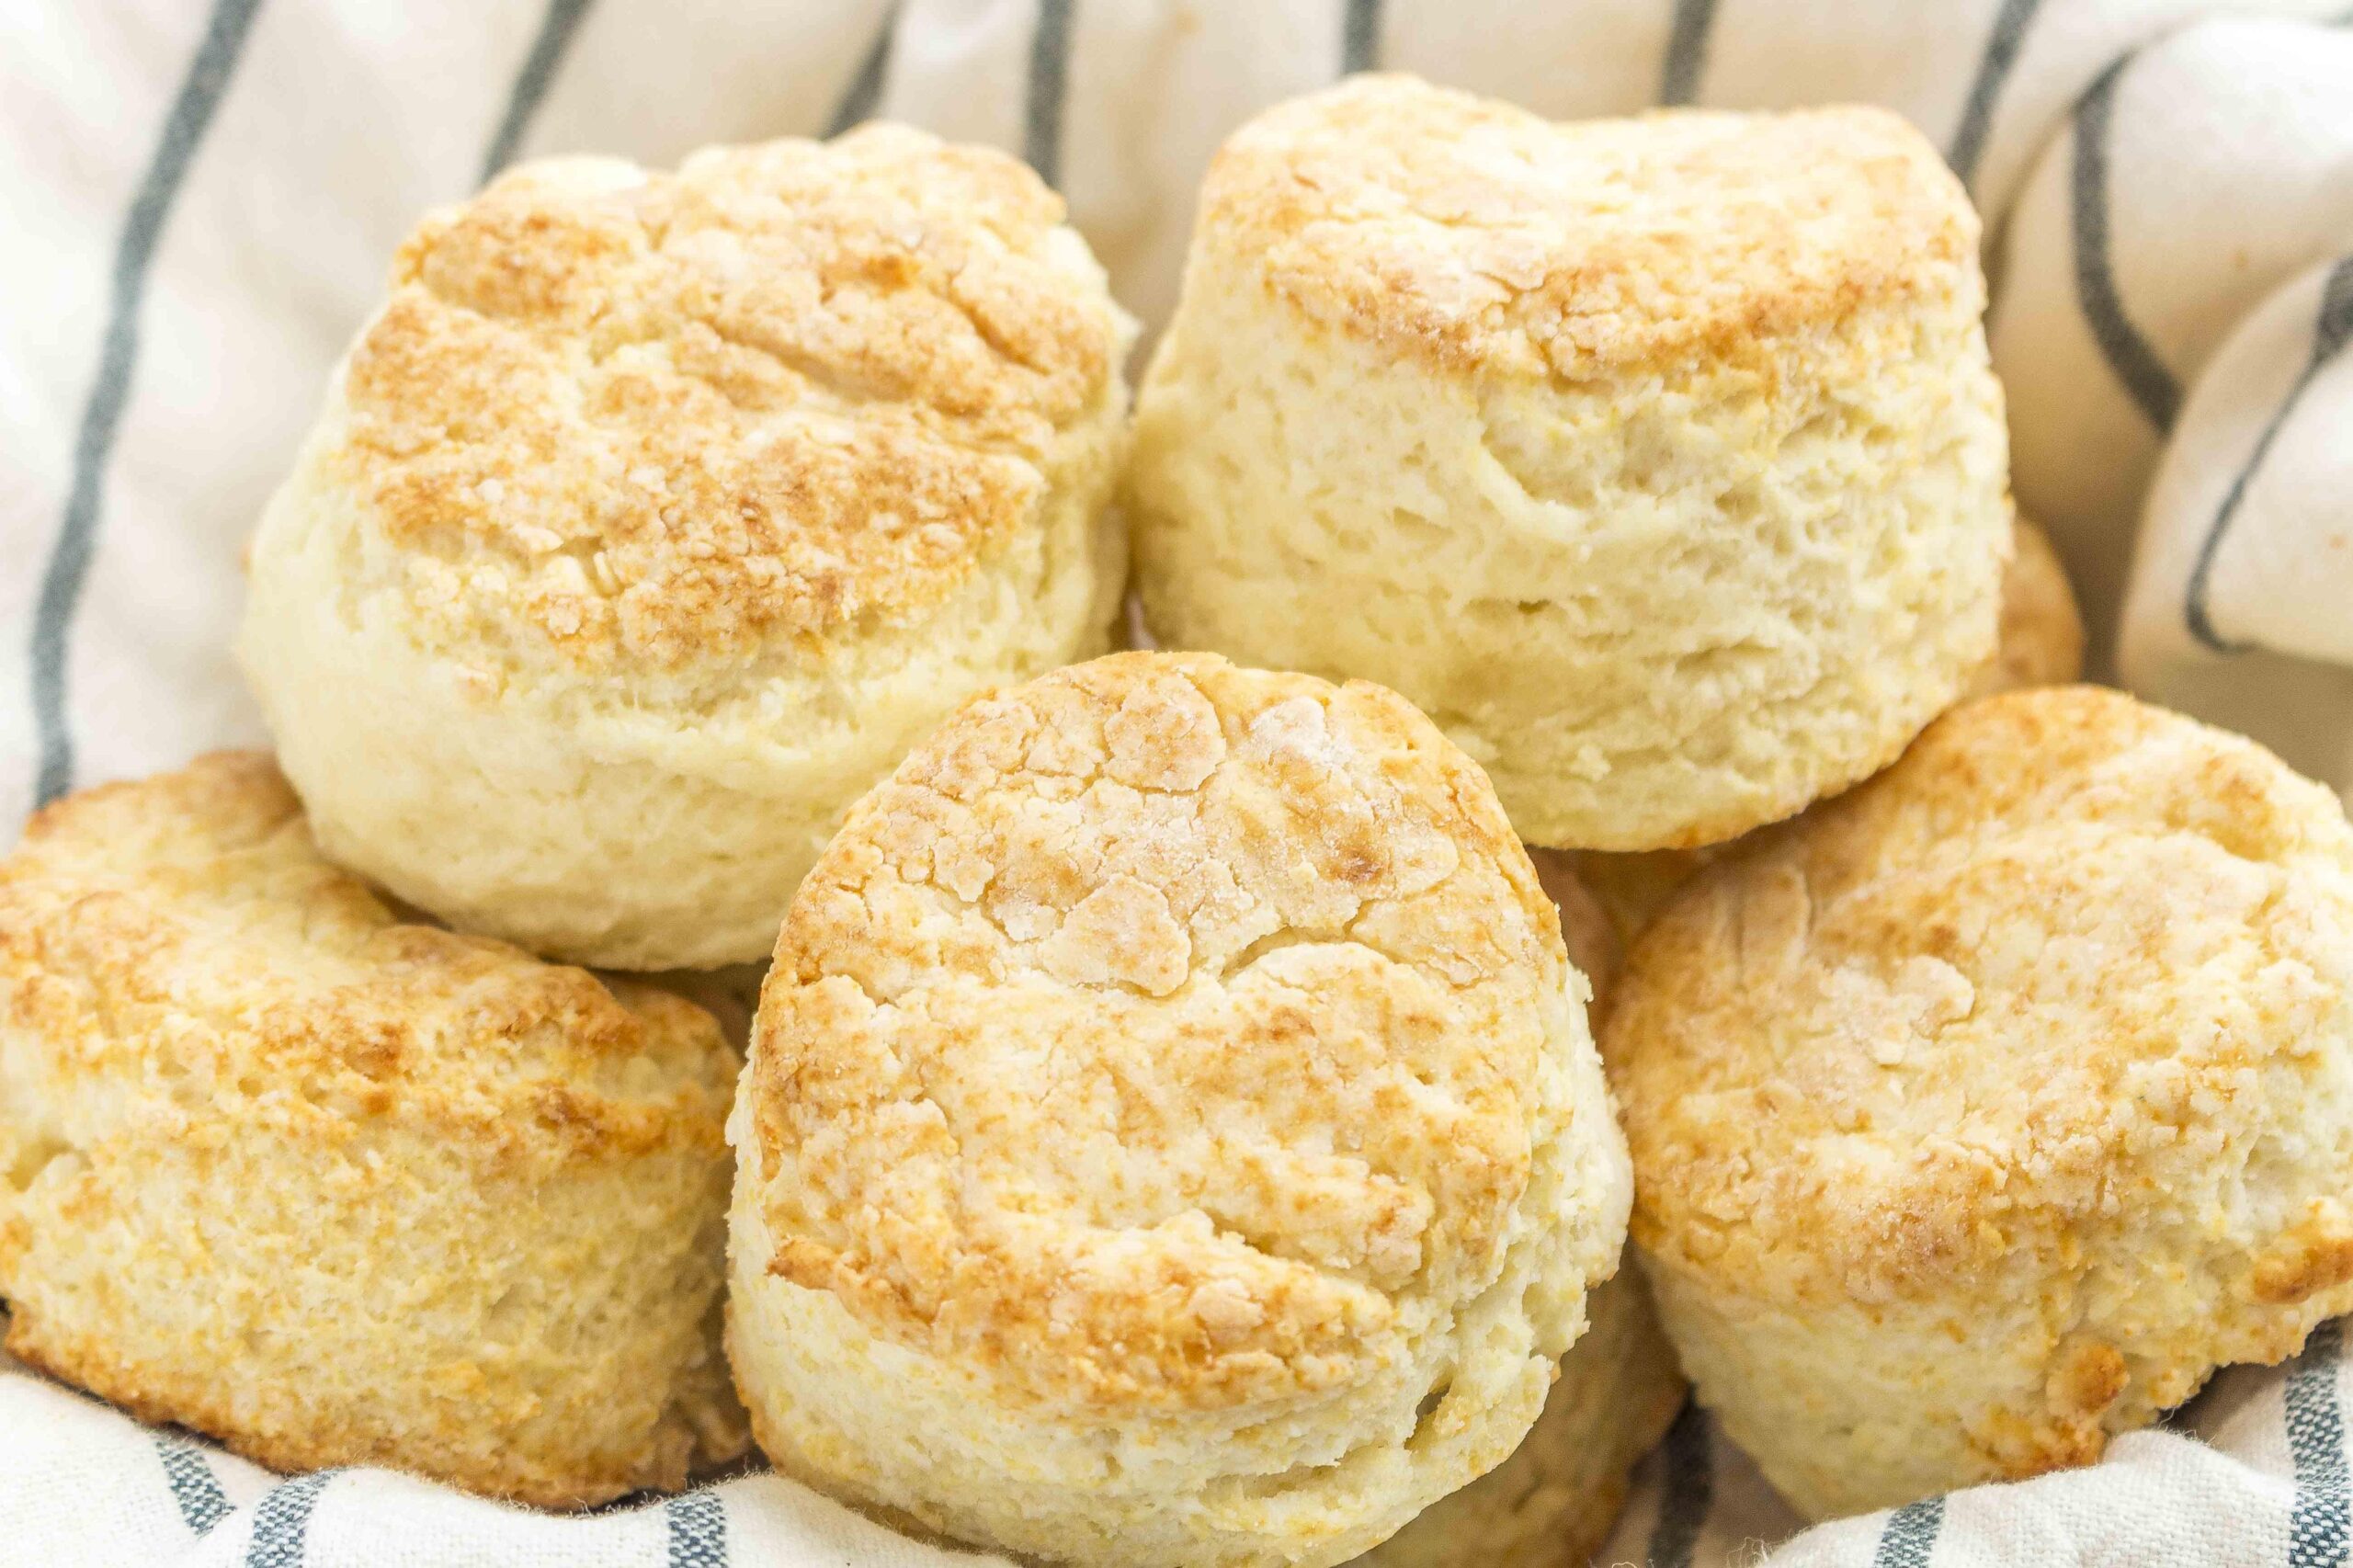  These gluten-free biscuits are light and tender, perfect for sandwiches or with a little bit of butter.